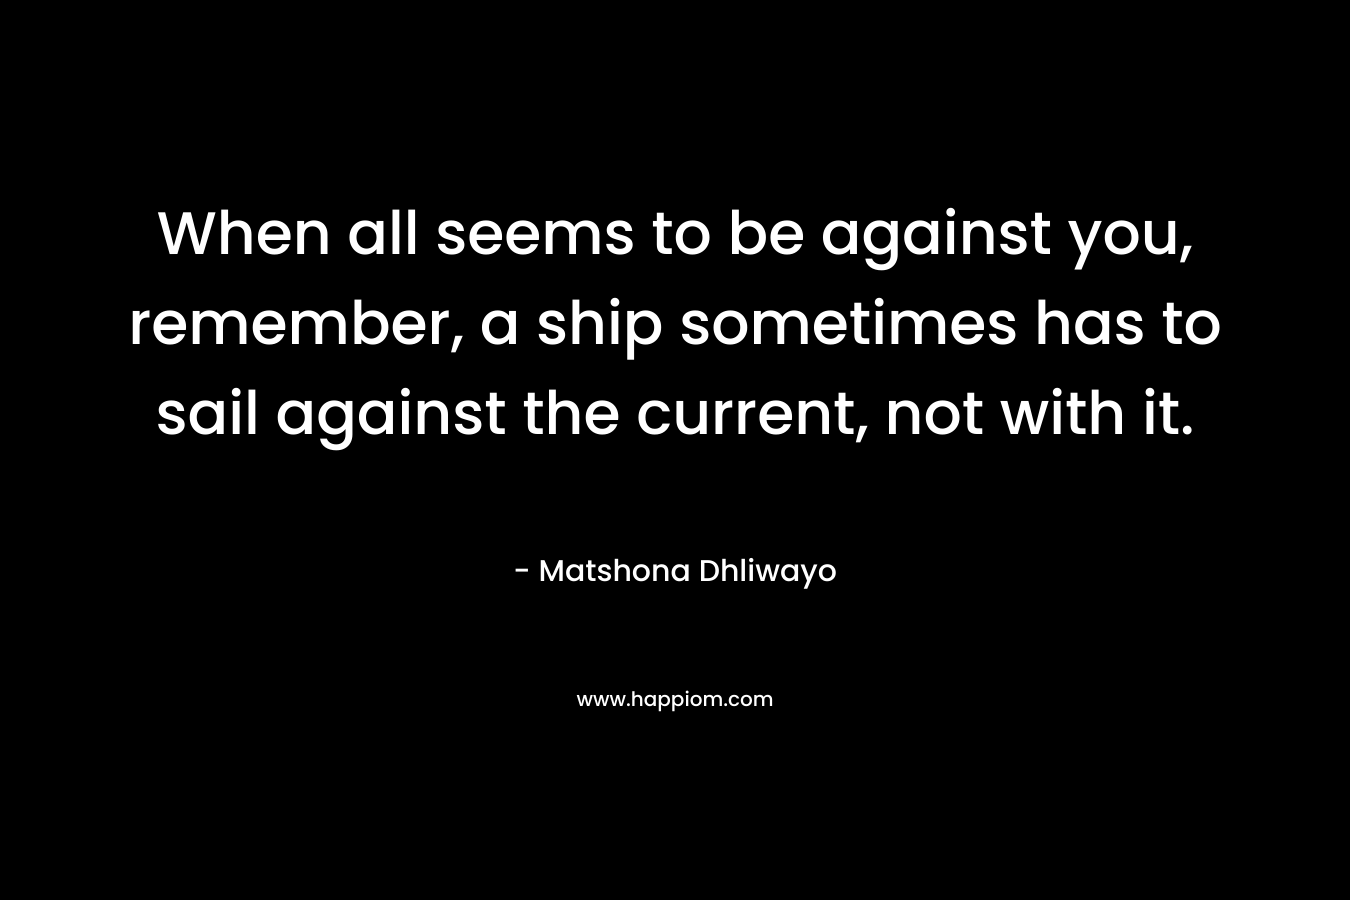 When all seems to be against you, remember, a ship sometimes has to sail against the current, not with it.